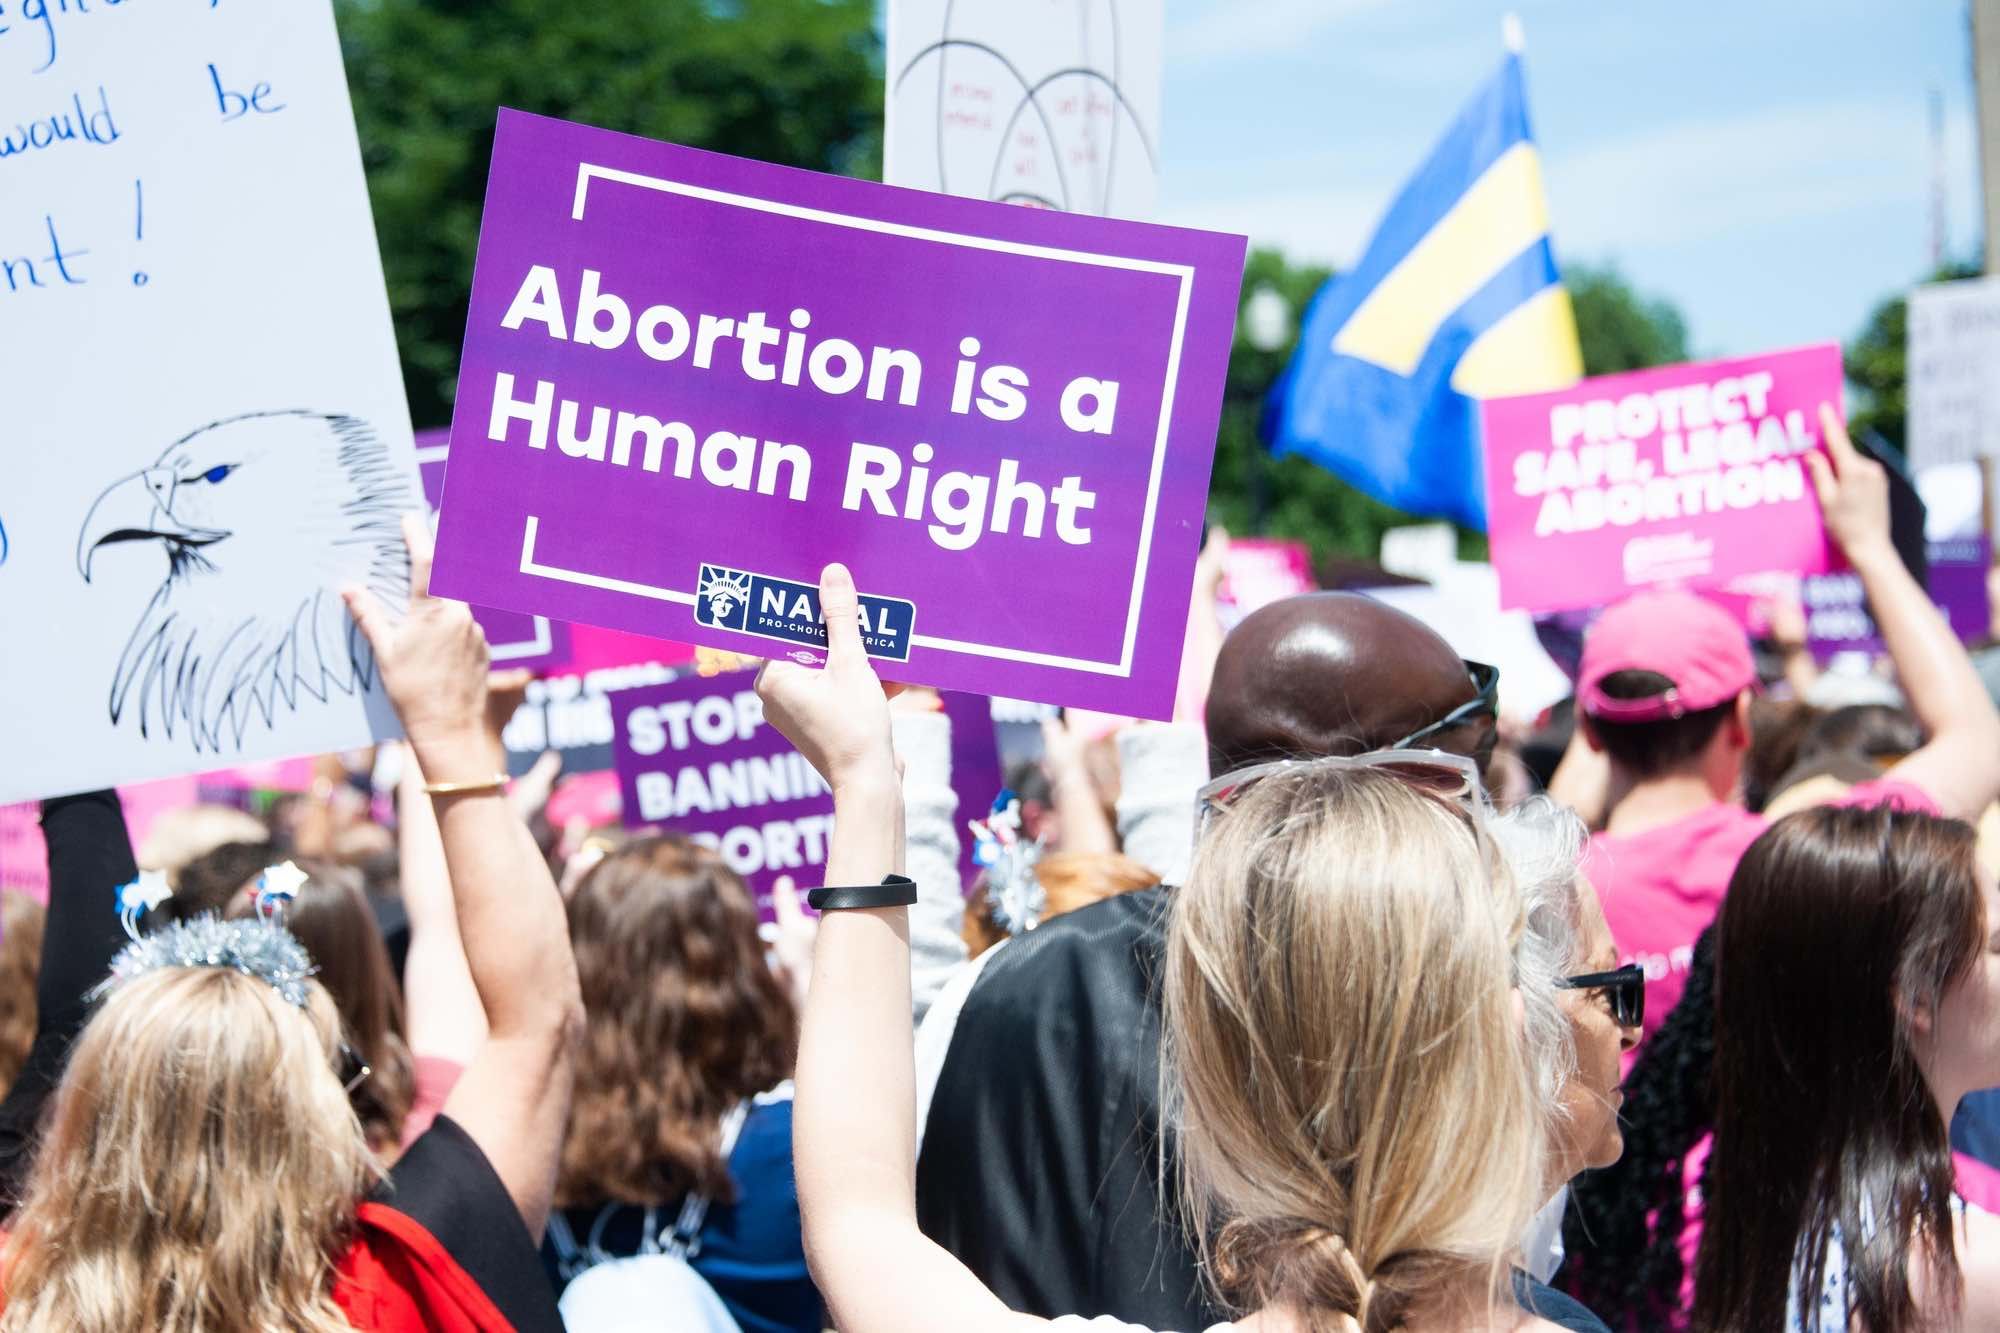 Planned Parenthood's recent lawsuit argues that abortion is a human right.